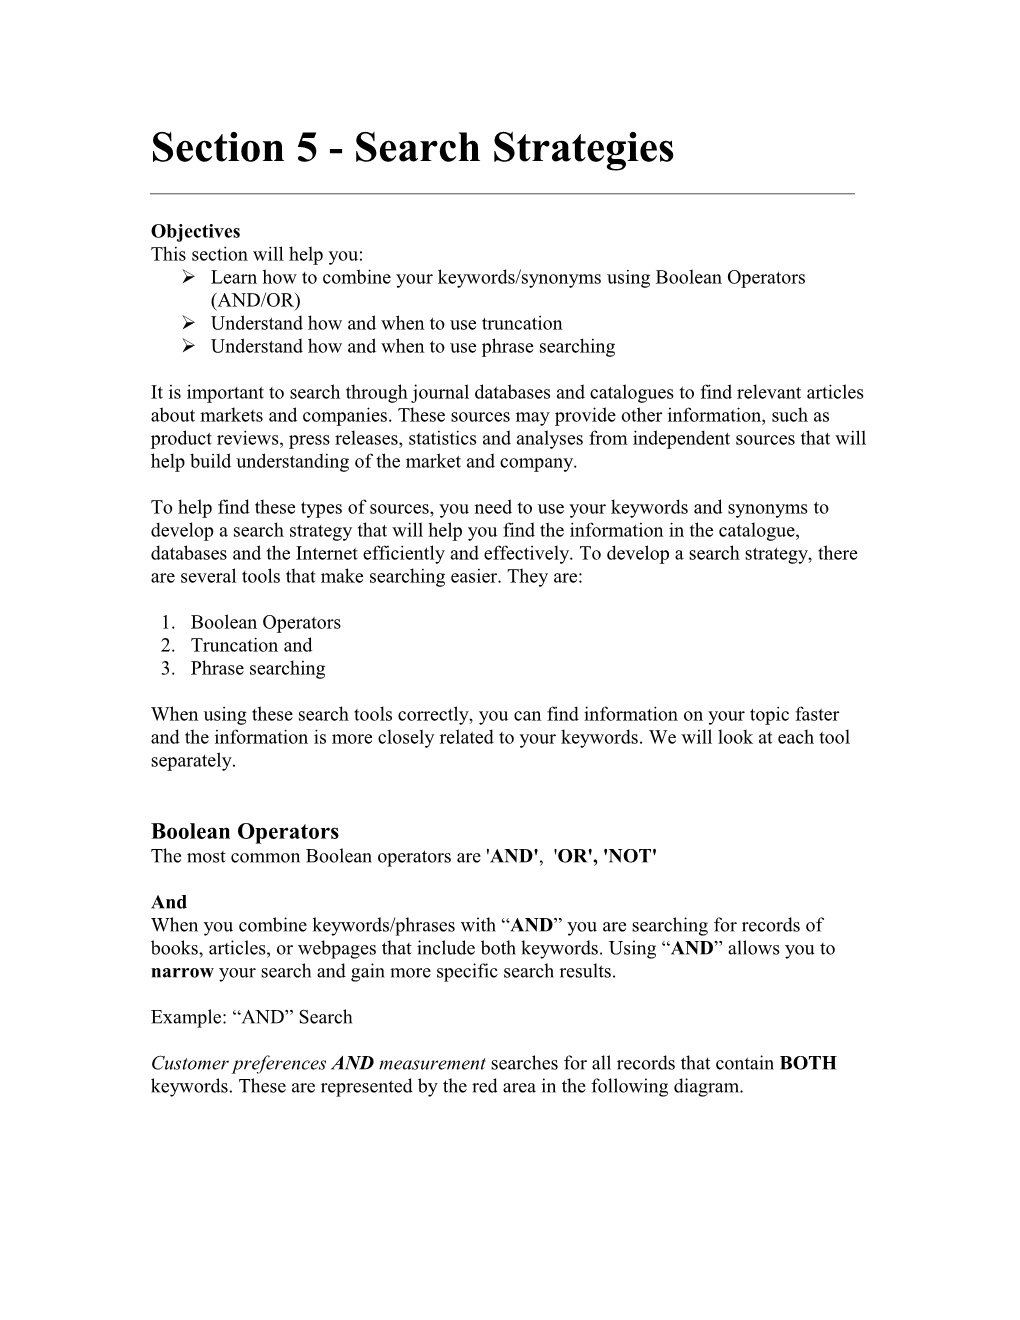 Section 5 - Search Strategies